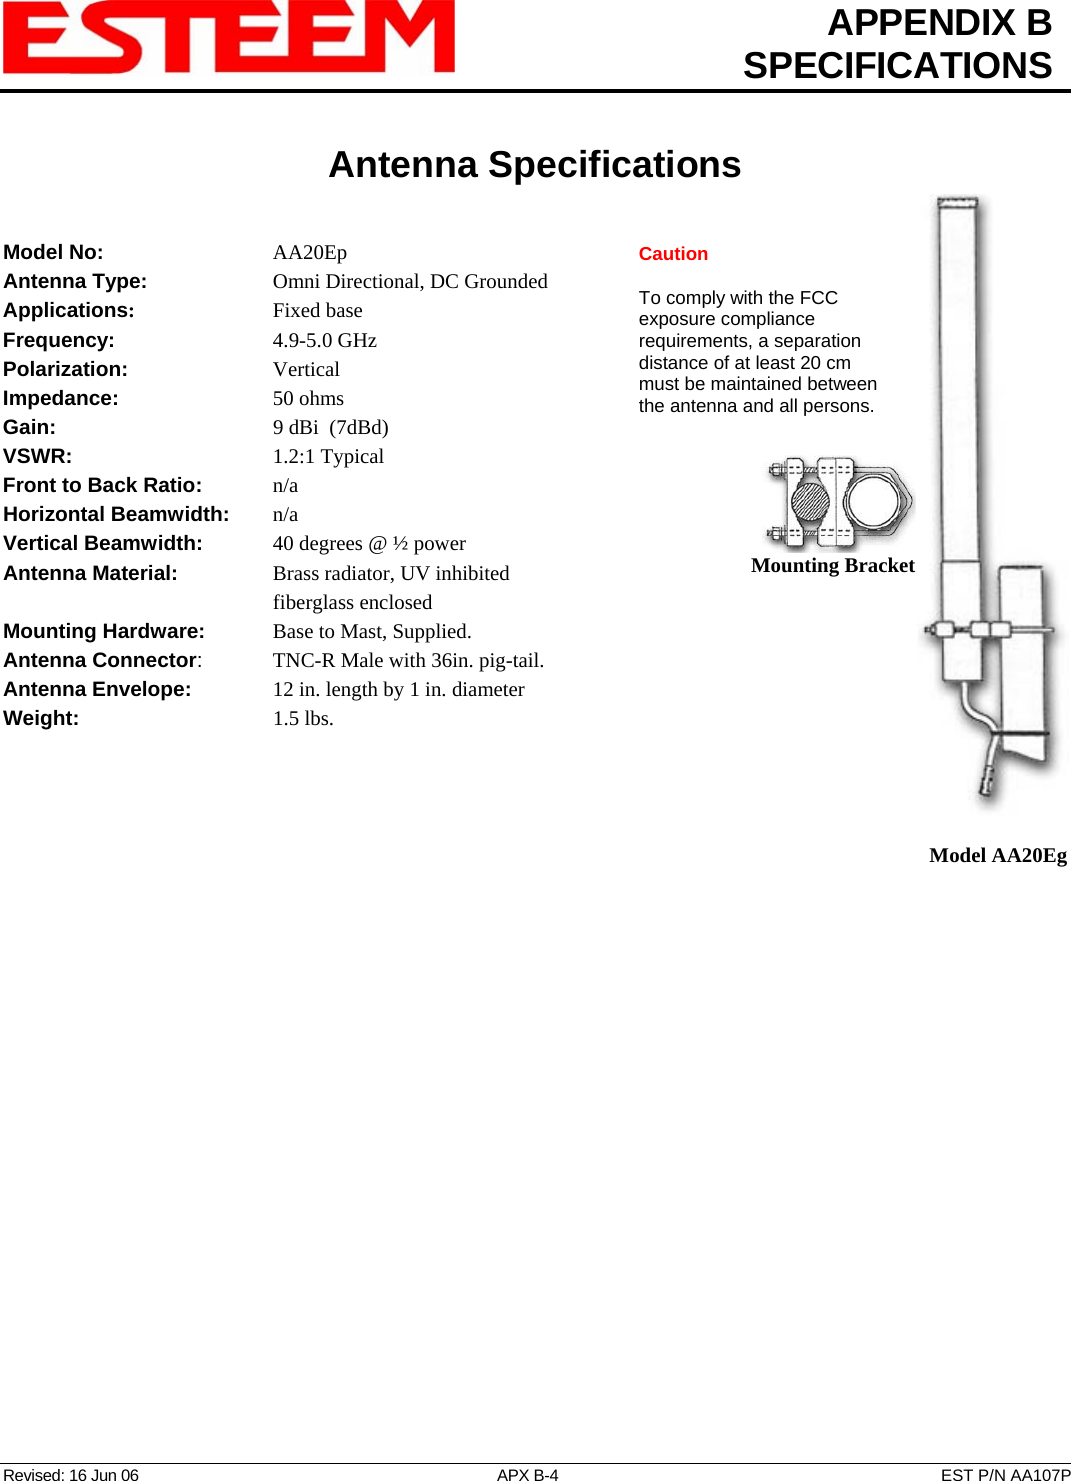  APPENDIX B  SPECIFICATIONS   Antenna Specifications   Revised: 16 Jun 06  APX B-4  EST P/N AA107P  Mounting Bracket   Model AA20Eg Caution  To comply with the FCC exposure compliance requirements, a separation distance of at least 20 cm must be maintained between the antenna and all persons. Model No:    AA20Ep Antenna Type:      Omni Directional, DC Grounded Applications:    Fixed base Frequency:    4.9-5.0 GHz Polarization:    Vertical Impedance:    50 ohms Gain:     9 dBi  (7dBd) VSWR:      1.2:1 Typical  Front to Back Ratio:   n/a Horizontal Beamwidth:  n/a Vertical Beamwidth:      40 degrees @ ½ power Antenna Material:     Brass radiator, UV inhibited fiberglass enclosed  Mounting Hardware:      Base to Mast, Supplied.  Antenna Connector:    TNC-R Male with 36in. pig-tail. Antenna Envelope:   12 in. length by 1 in. diameter Weight:       1.5 lbs.   